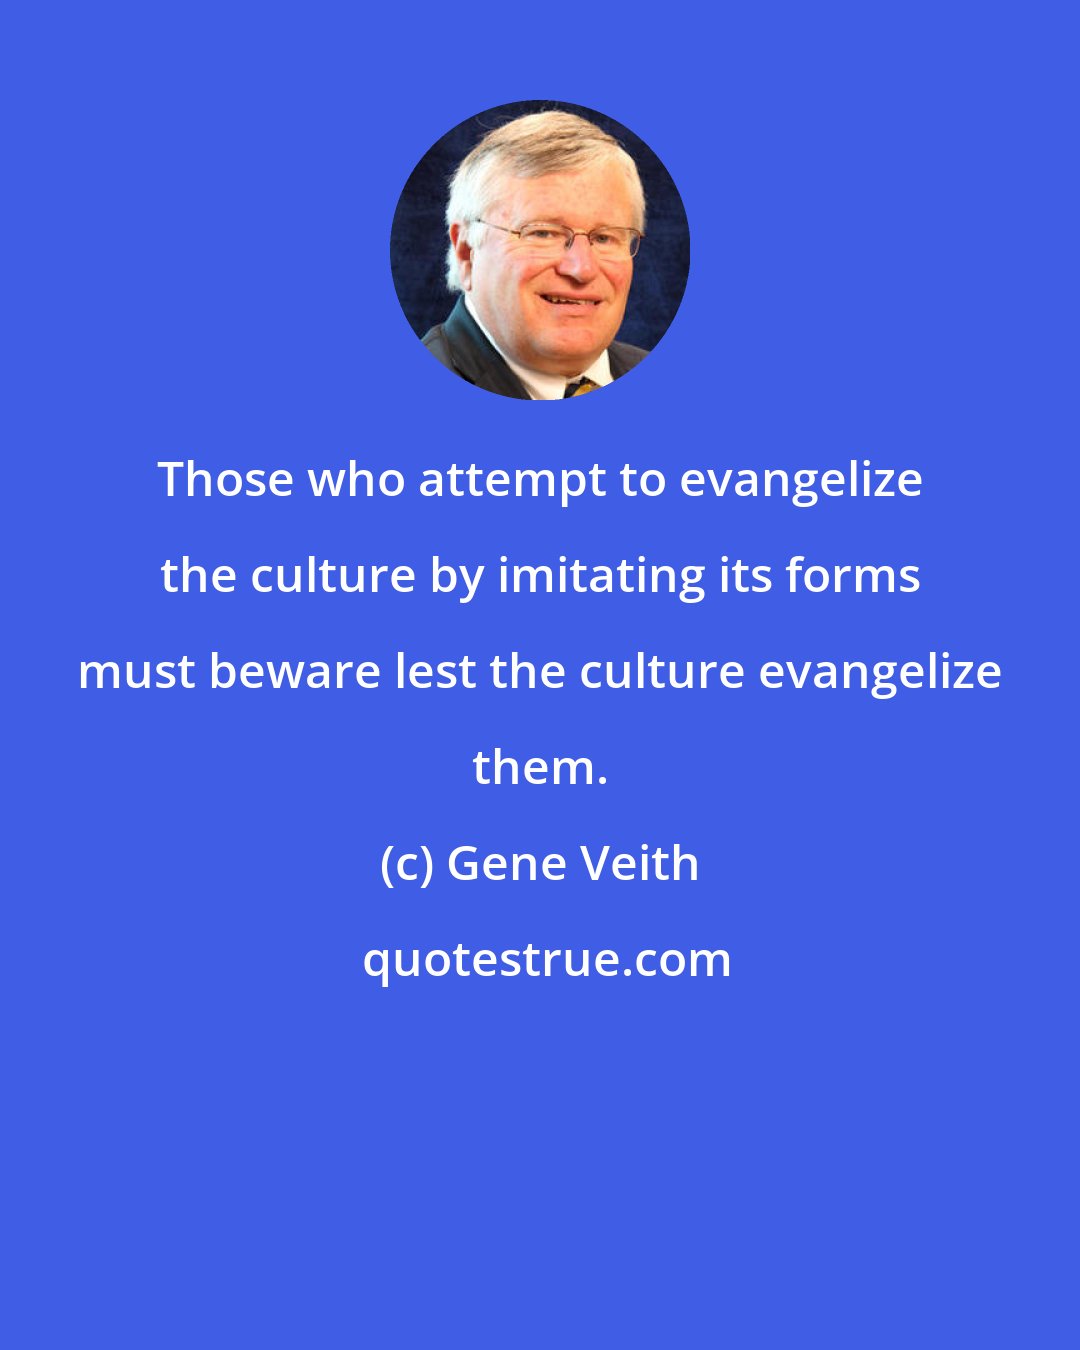 Gene Veith: Those who attempt to evangelize the culture by imitating its forms must beware lest the culture evangelize them.